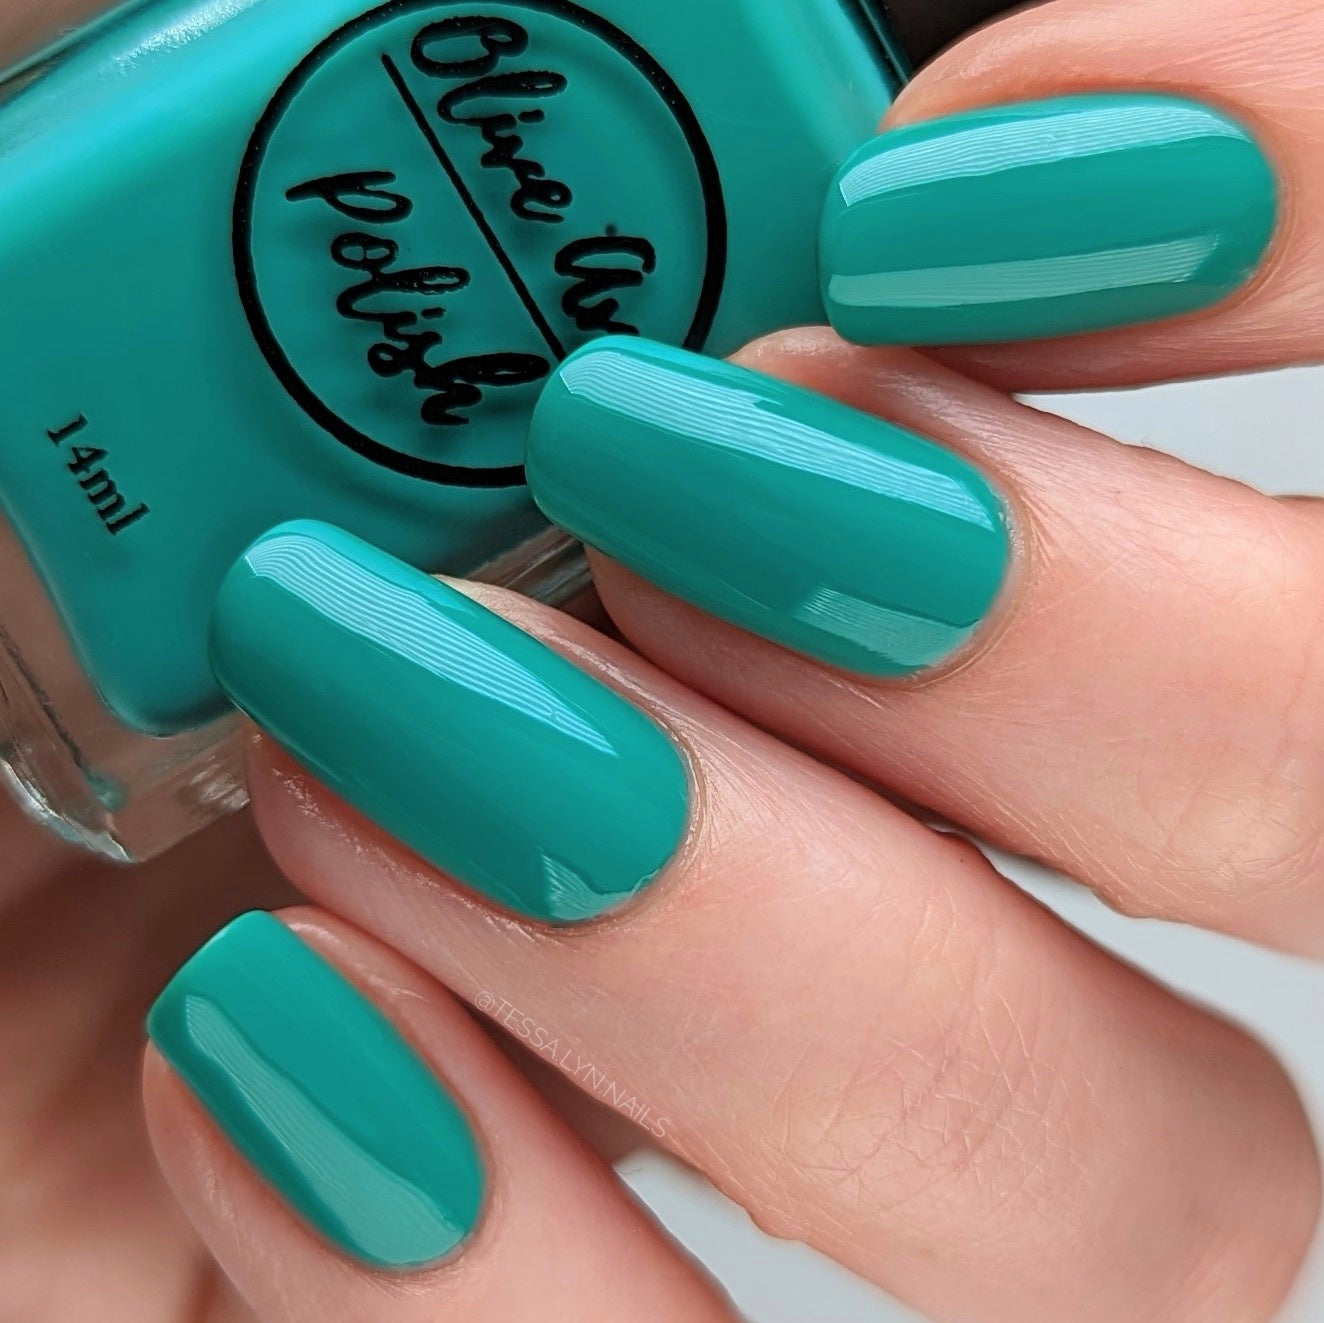 8 Pretty Spring Nail Polish Shades We're About To See Everywhere